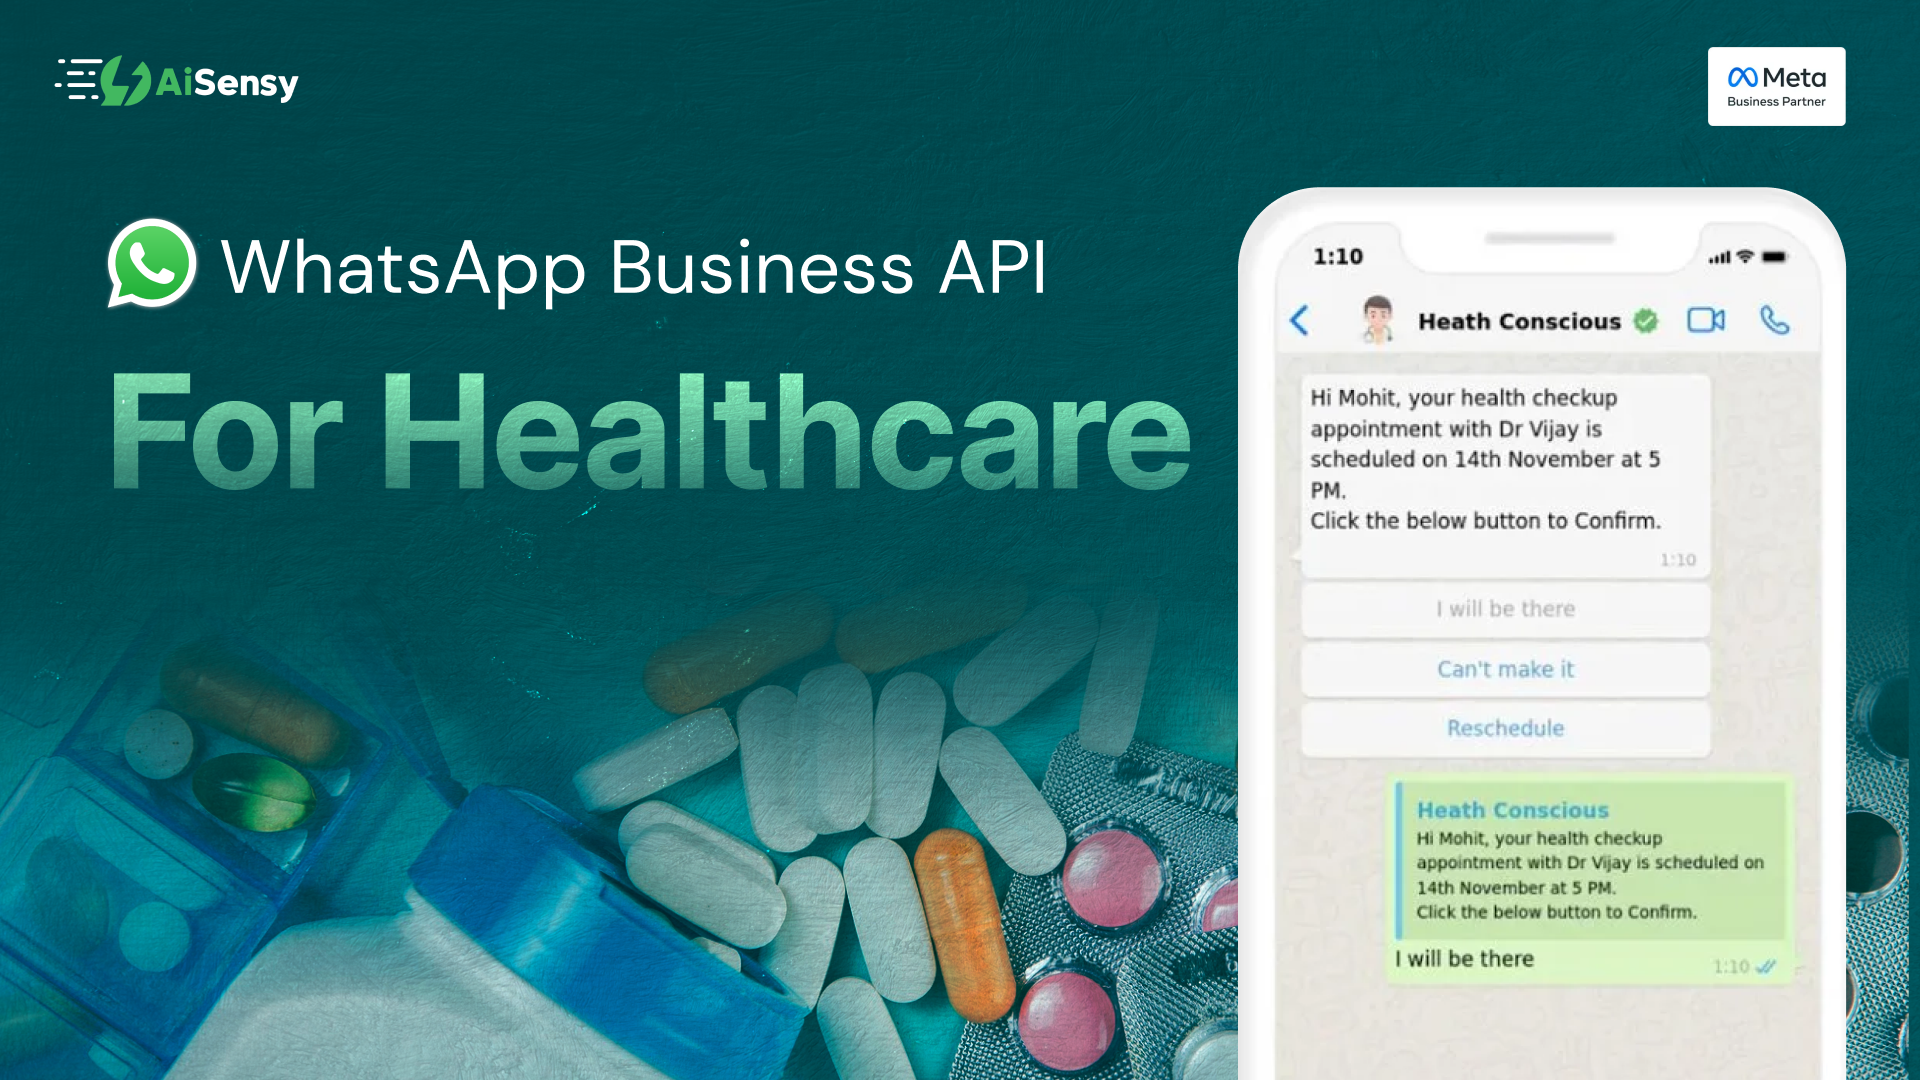 WhatsApp Business API Use Cases for Healthcare Businesses